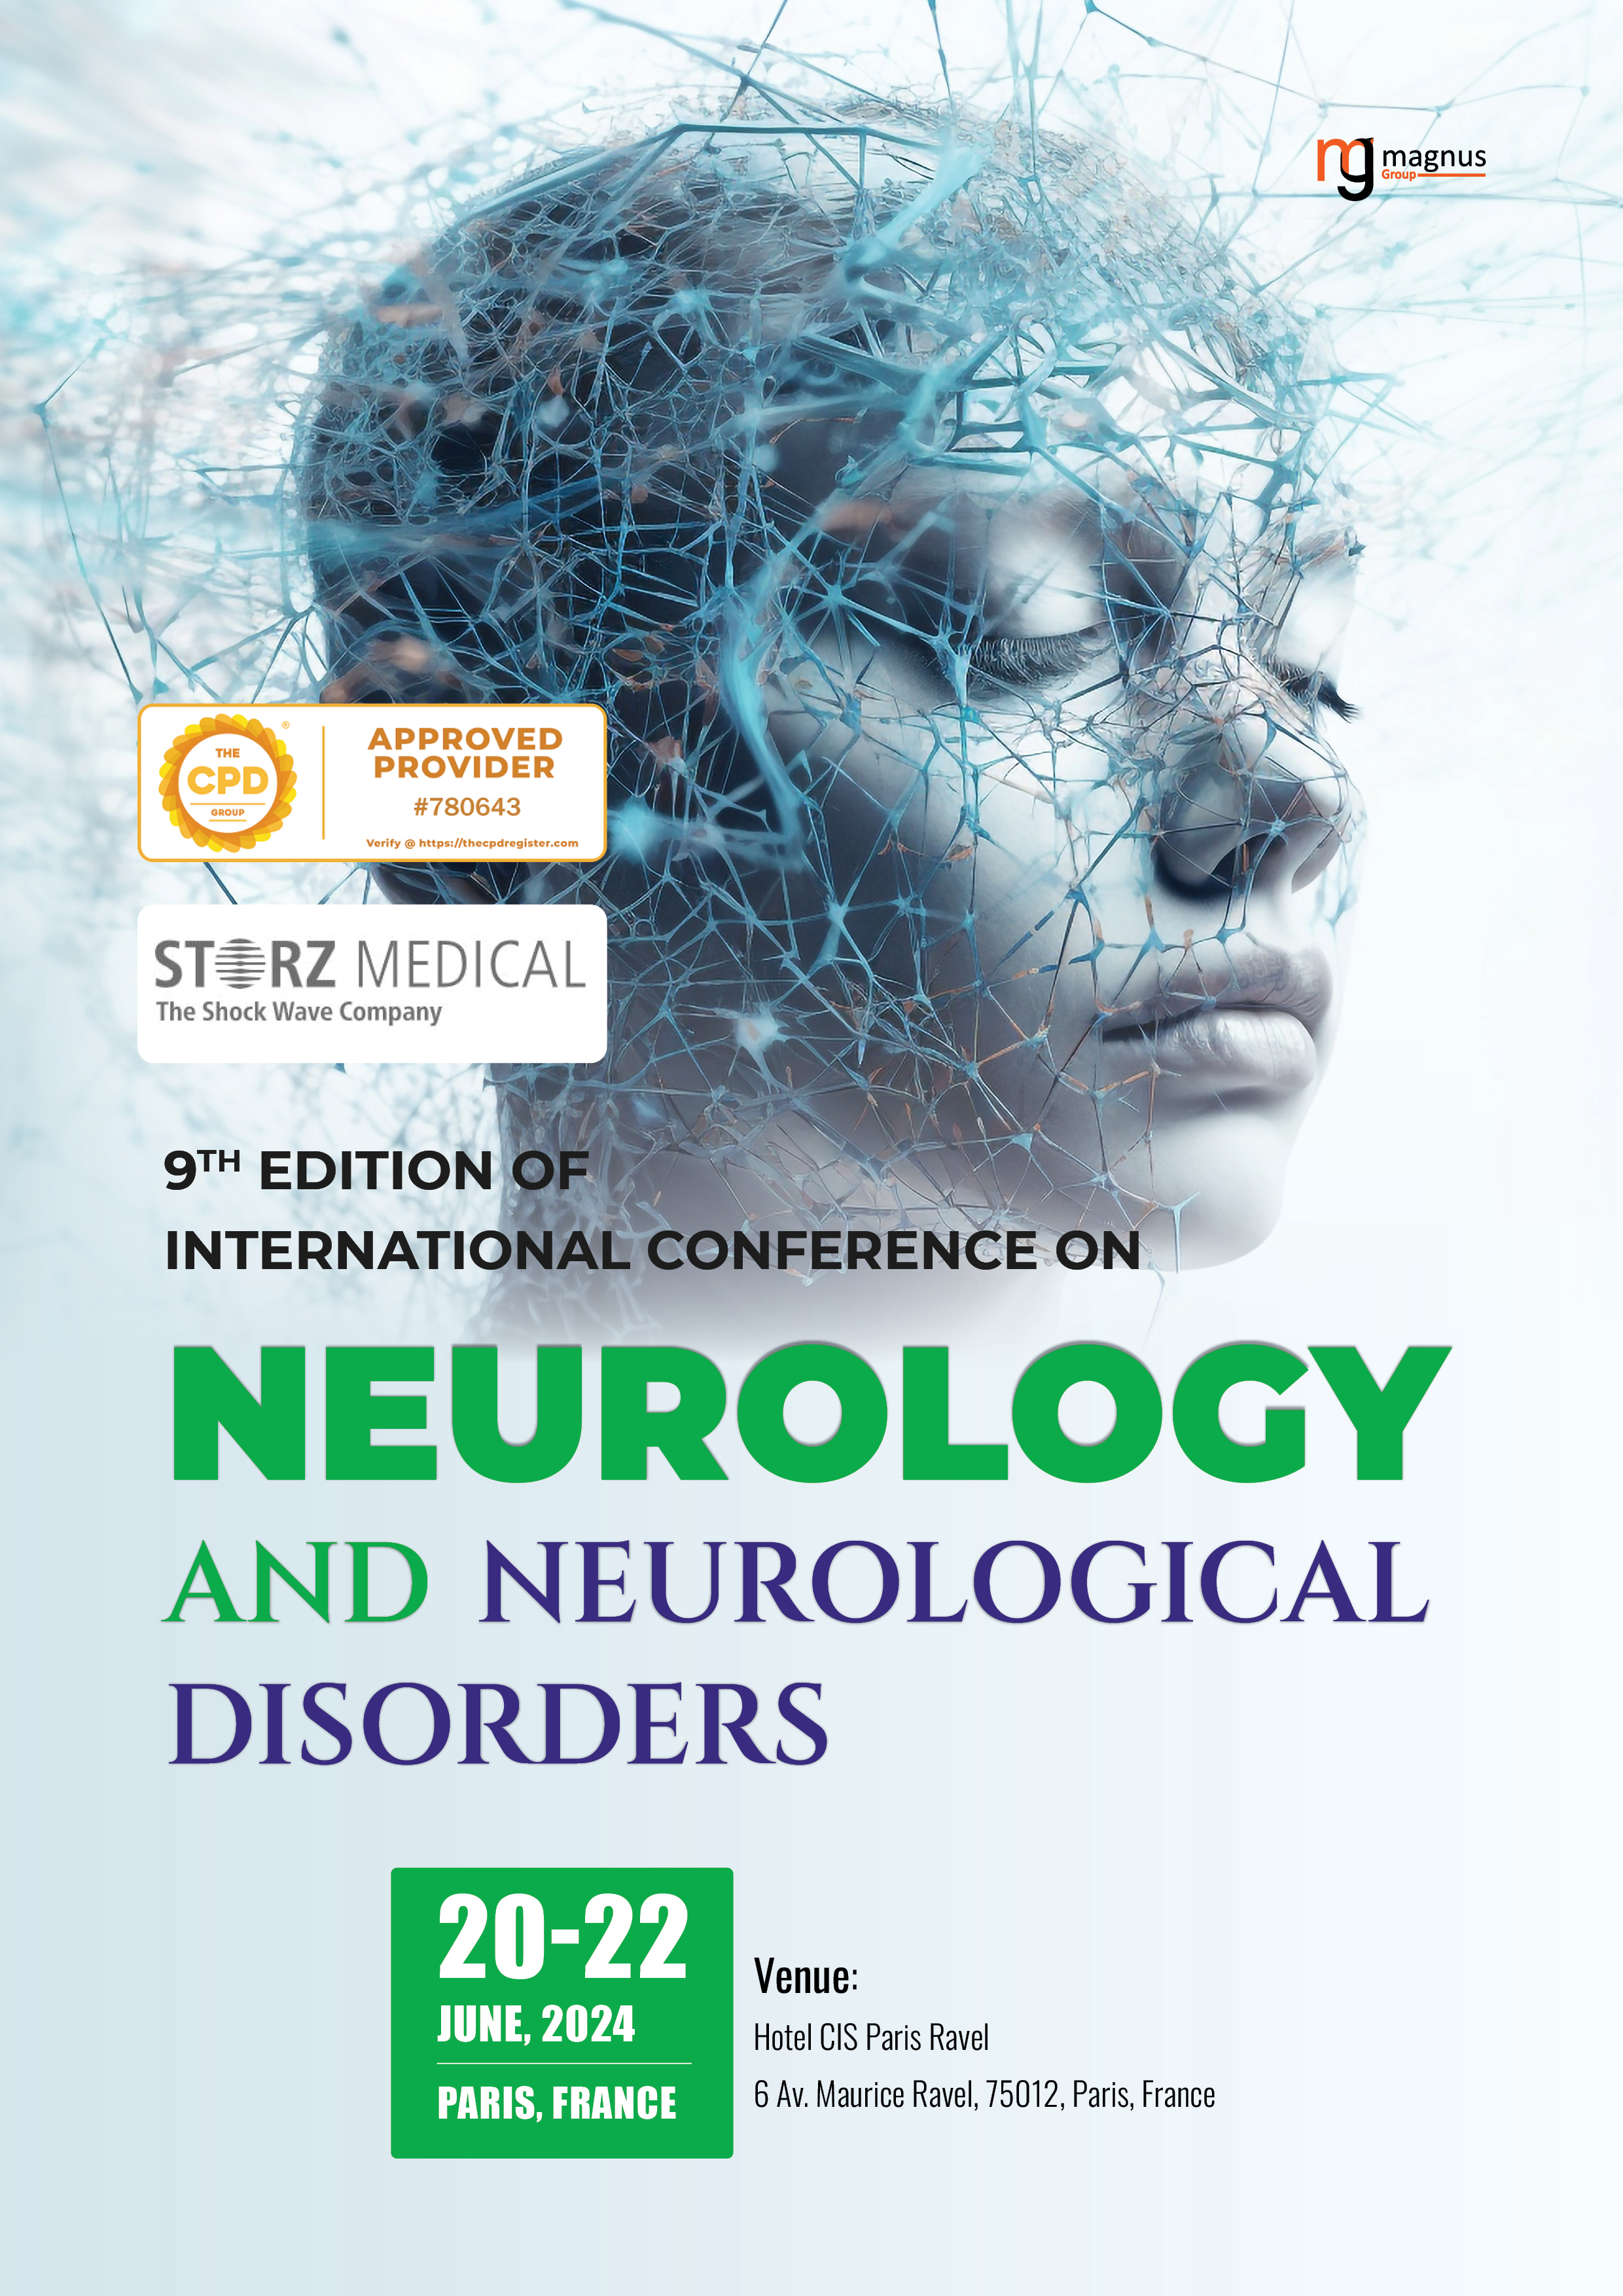 9th Edition of International Conference on Neurology and Neurological Disorders | Paris, France Book